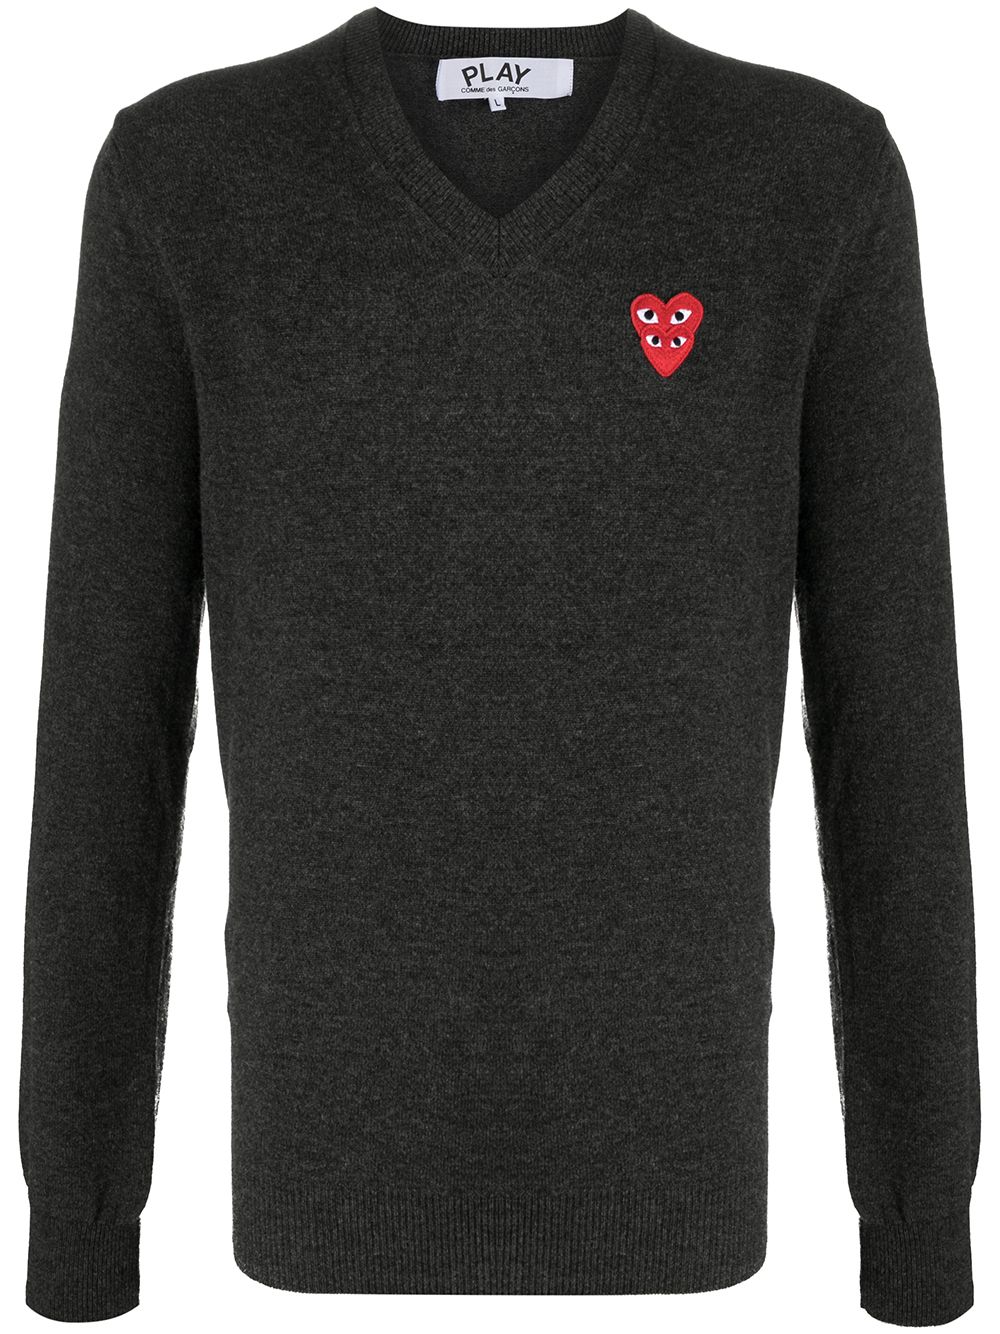 Comme Des Garçons Play embroidered double heart patch jumper - Grey von Comme Des Garçons Play